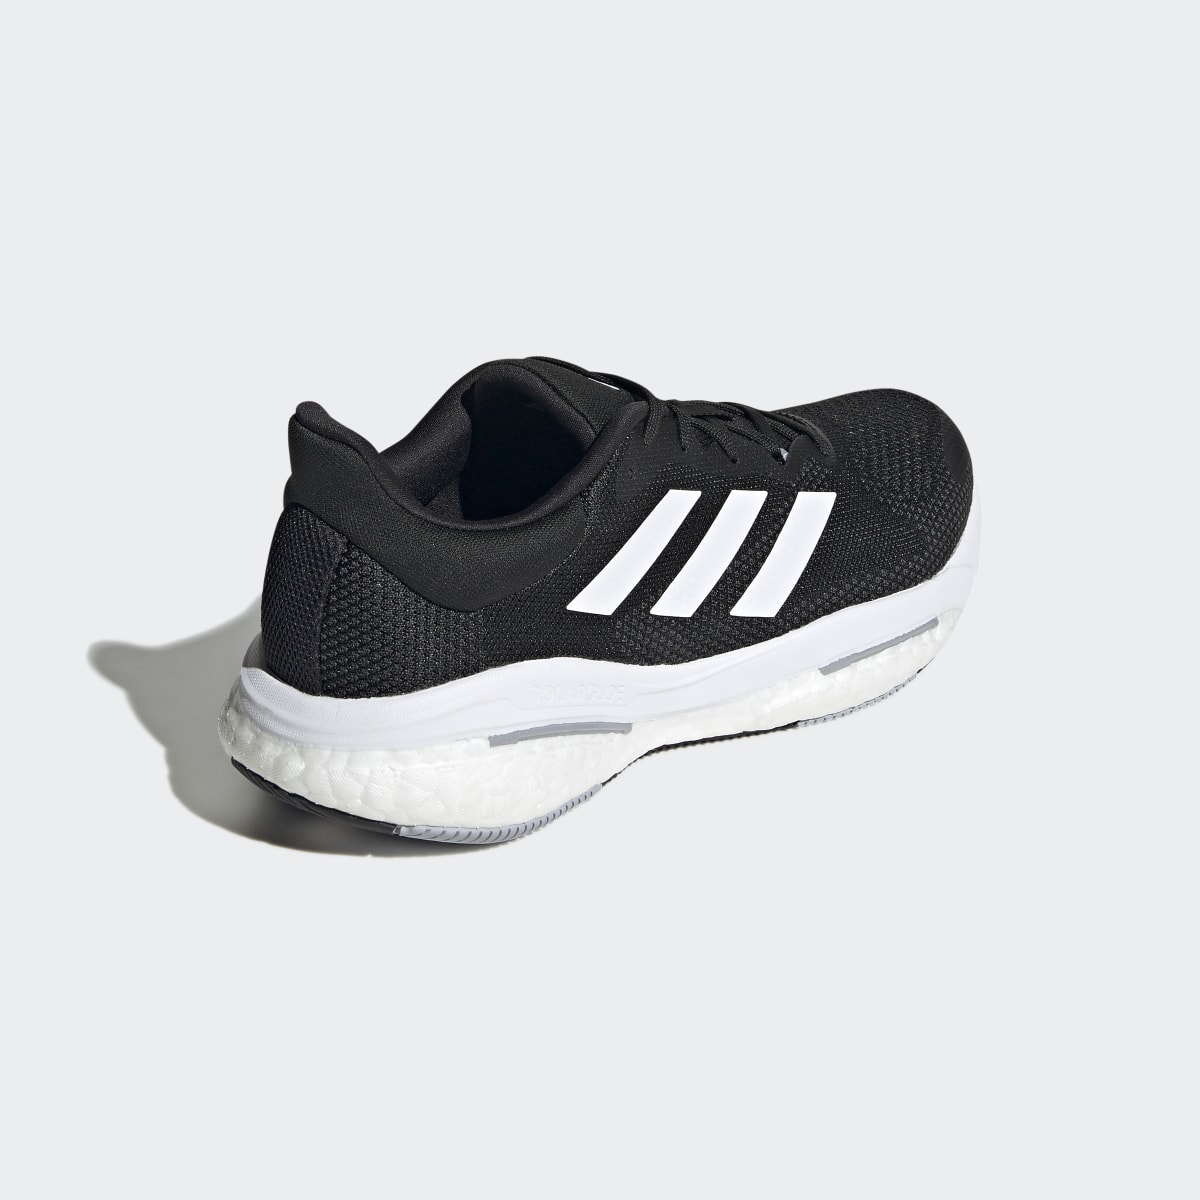 Adidas Solar Glide 5 Shoes Wide. 9